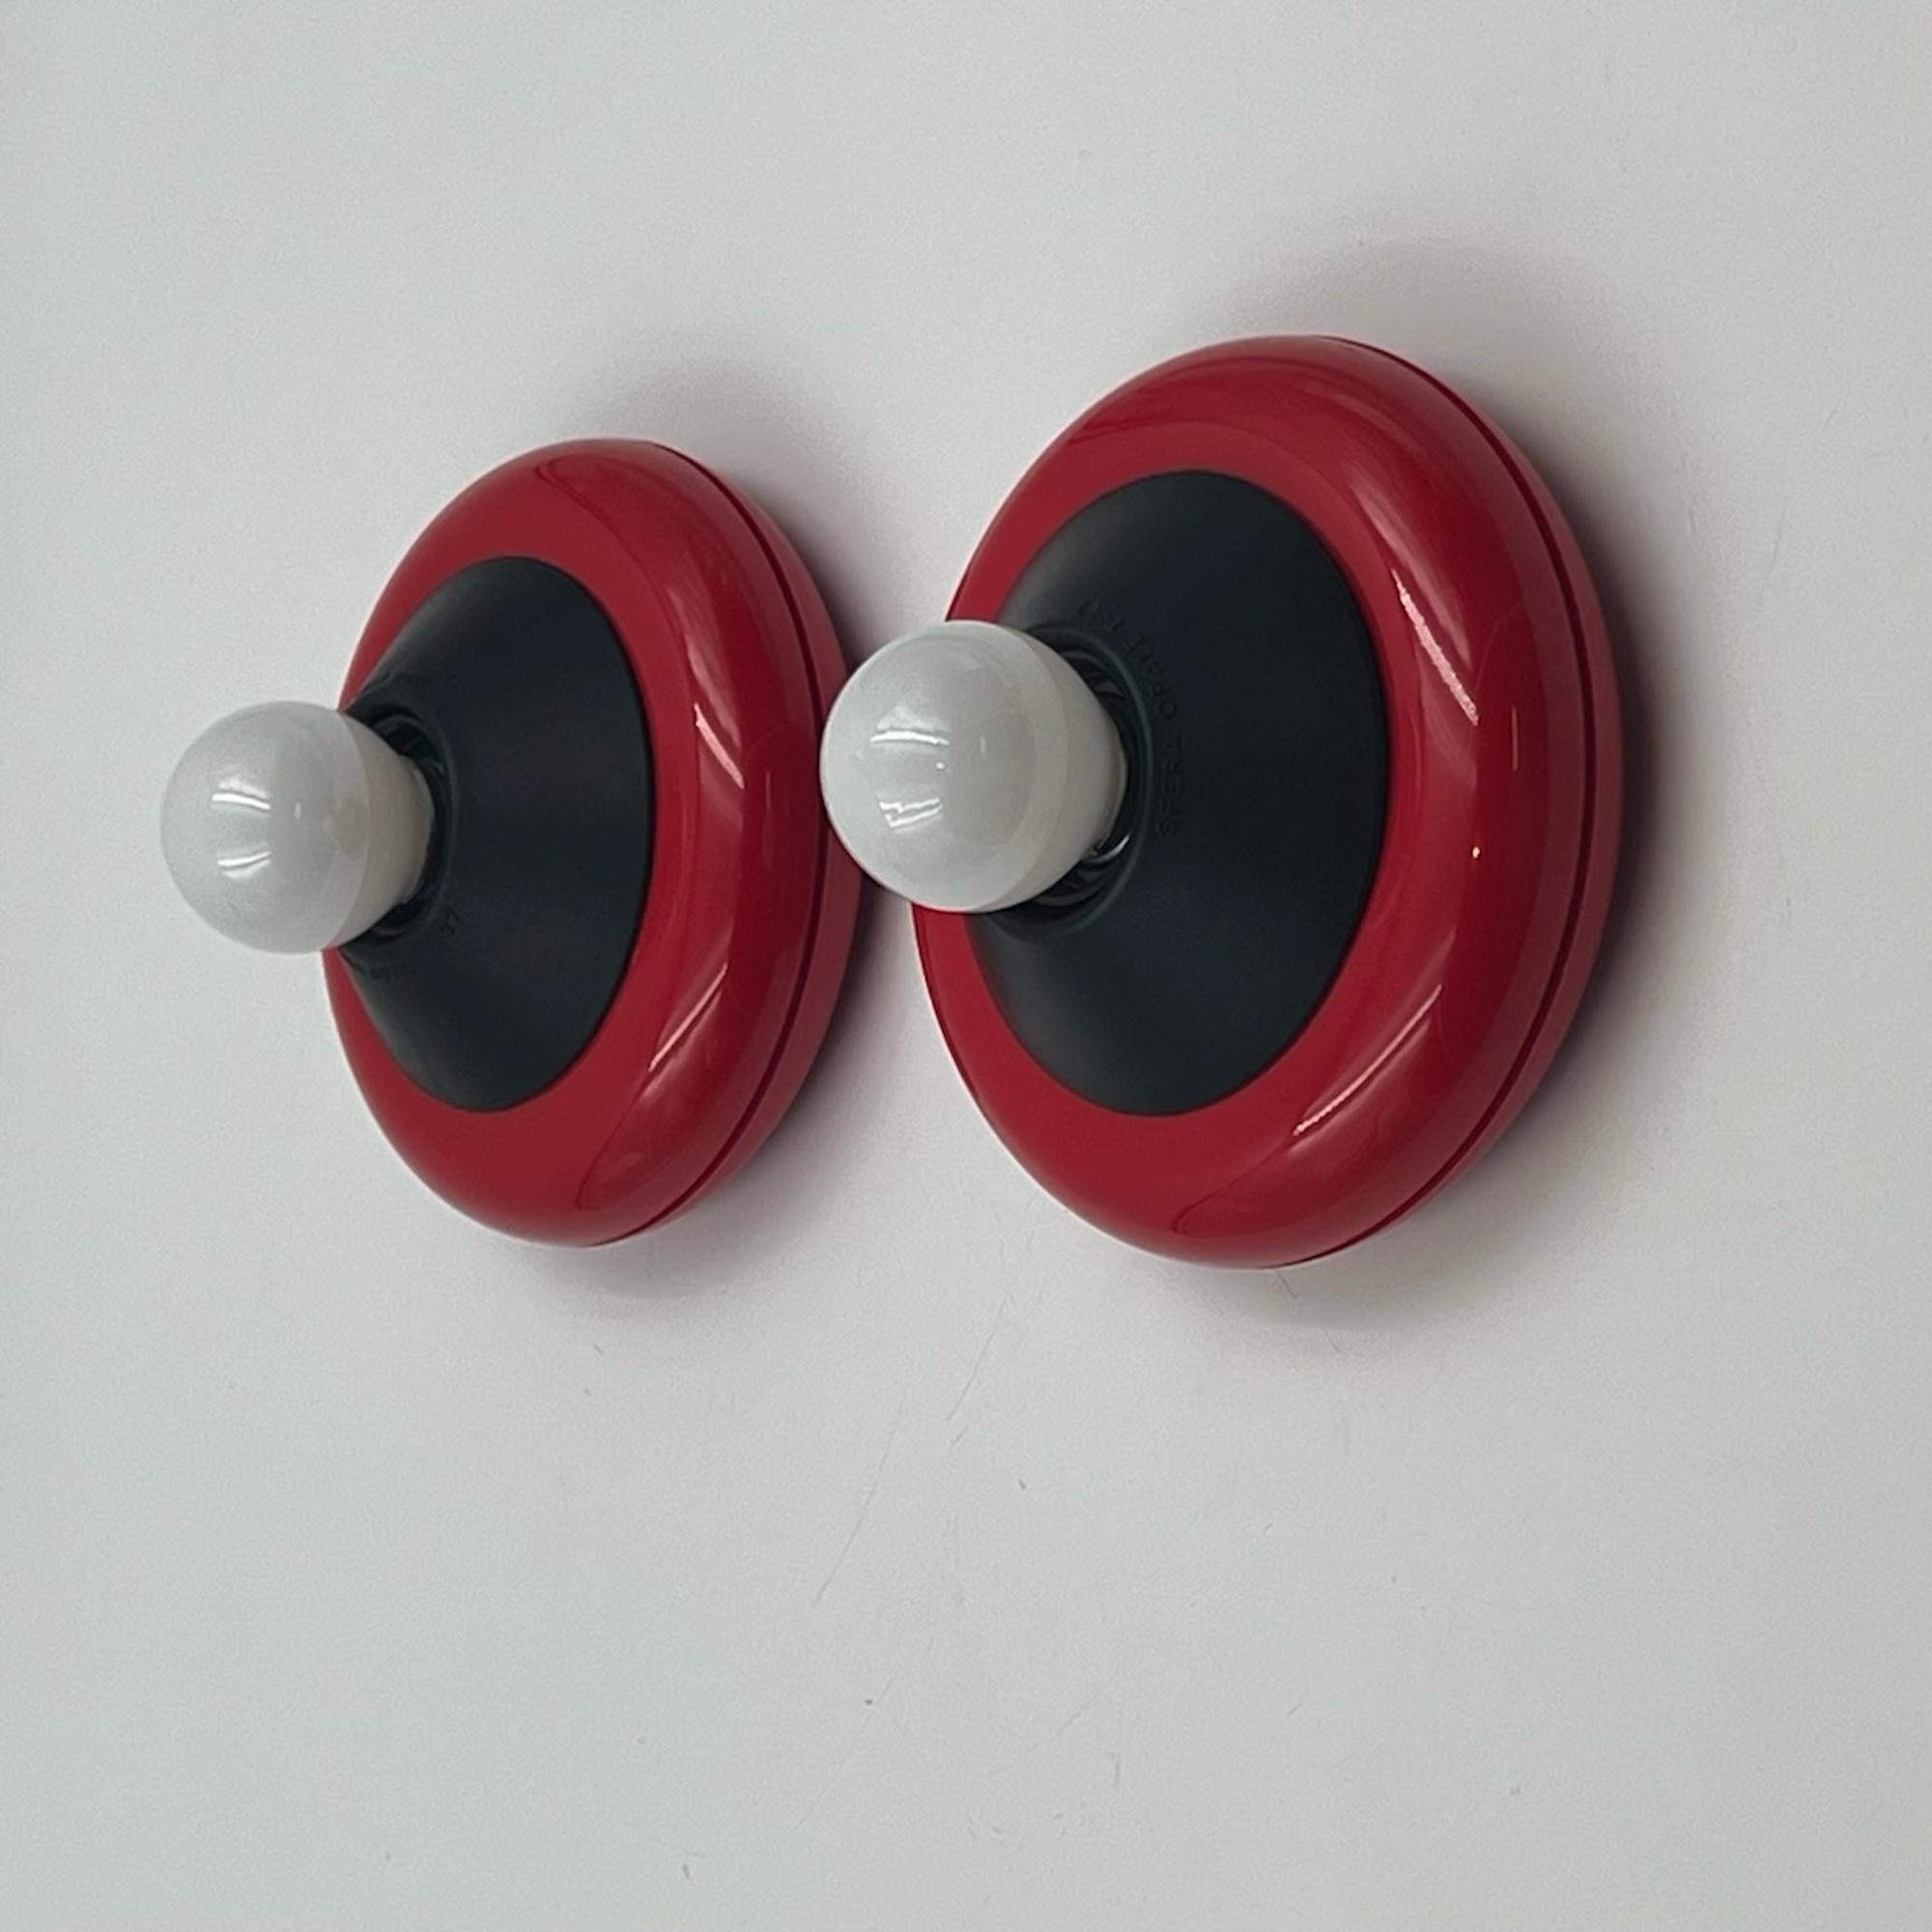 80s Italian Design Lamps by Luci Milano -'Flopi' Vibrant Red Flush Mount Lights In Excellent Condition For Sale In San Benedetto Del Tronto, IT